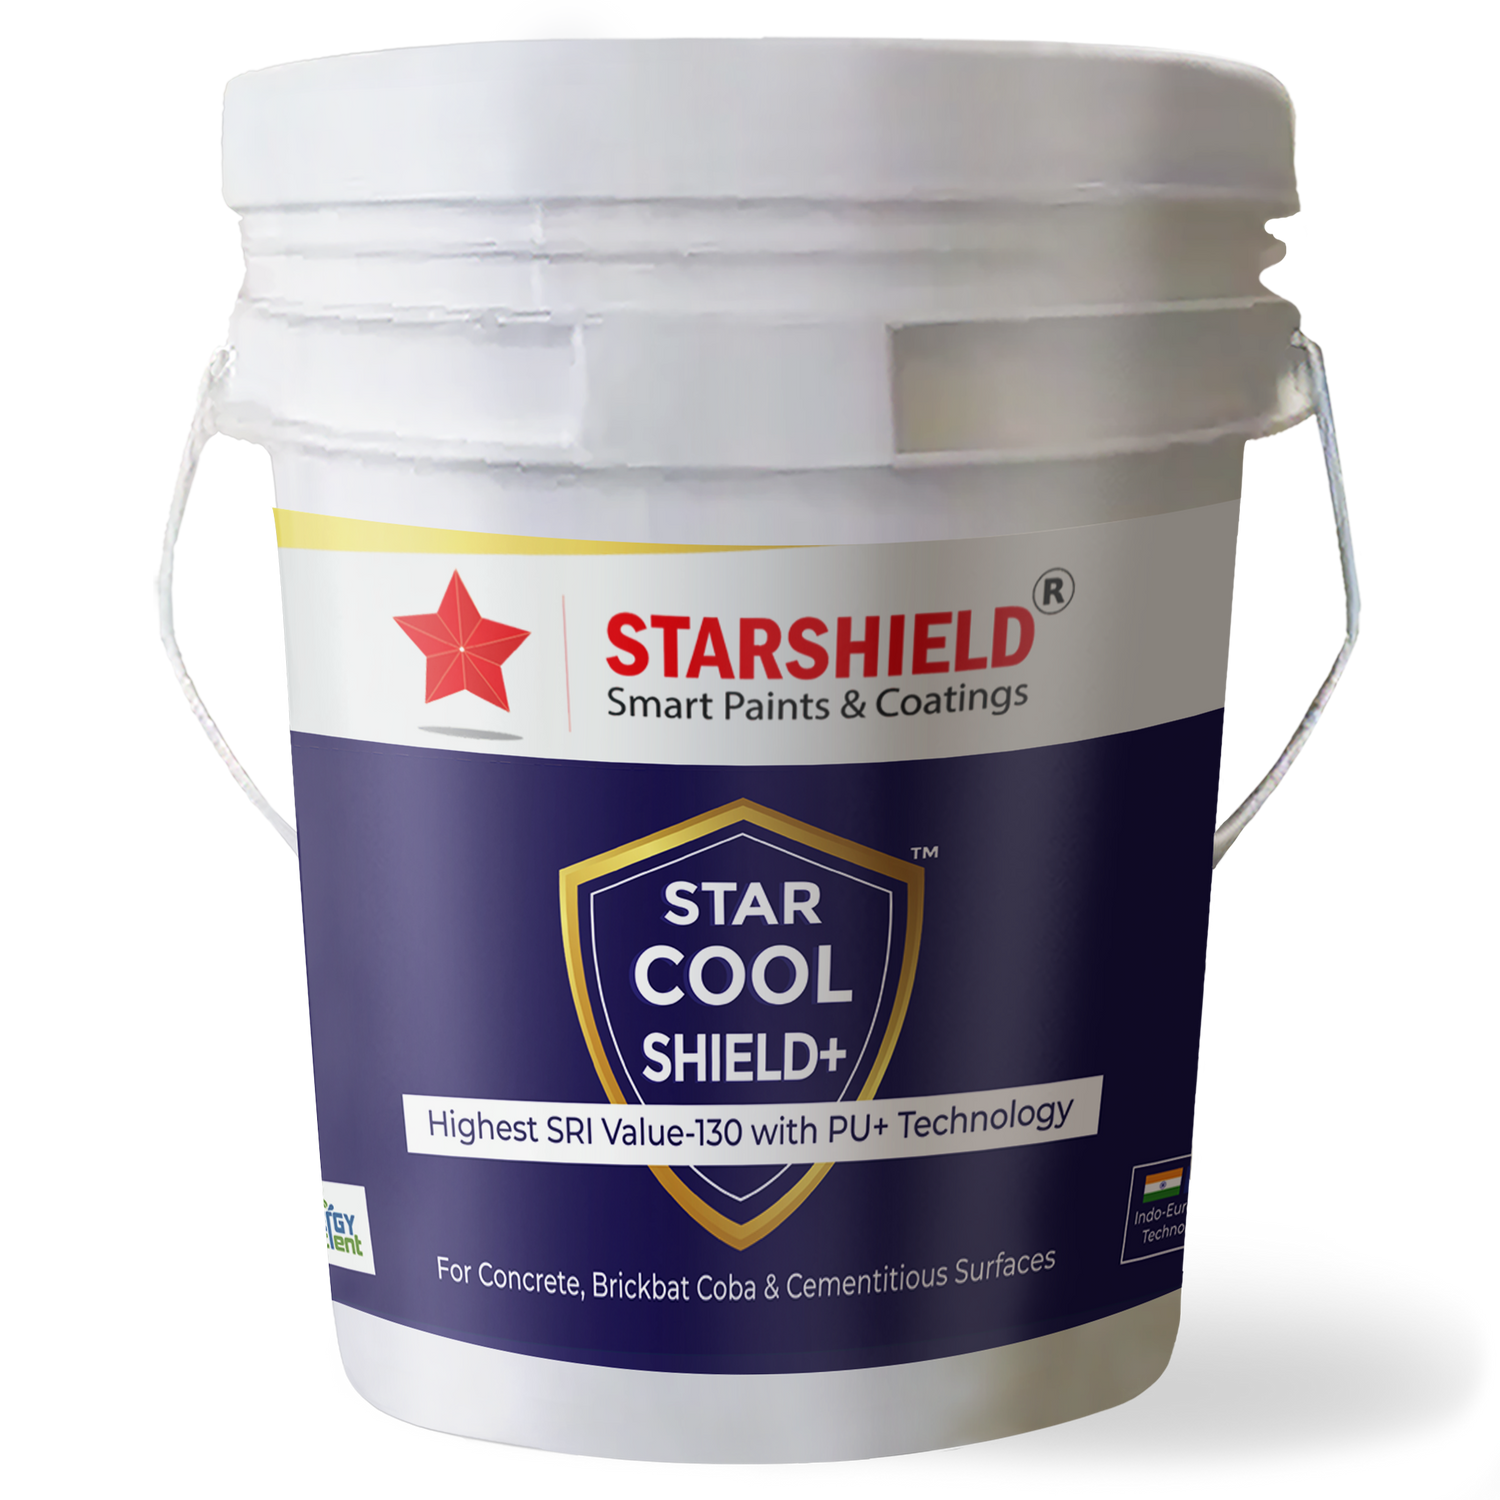 Thermal reflective paint